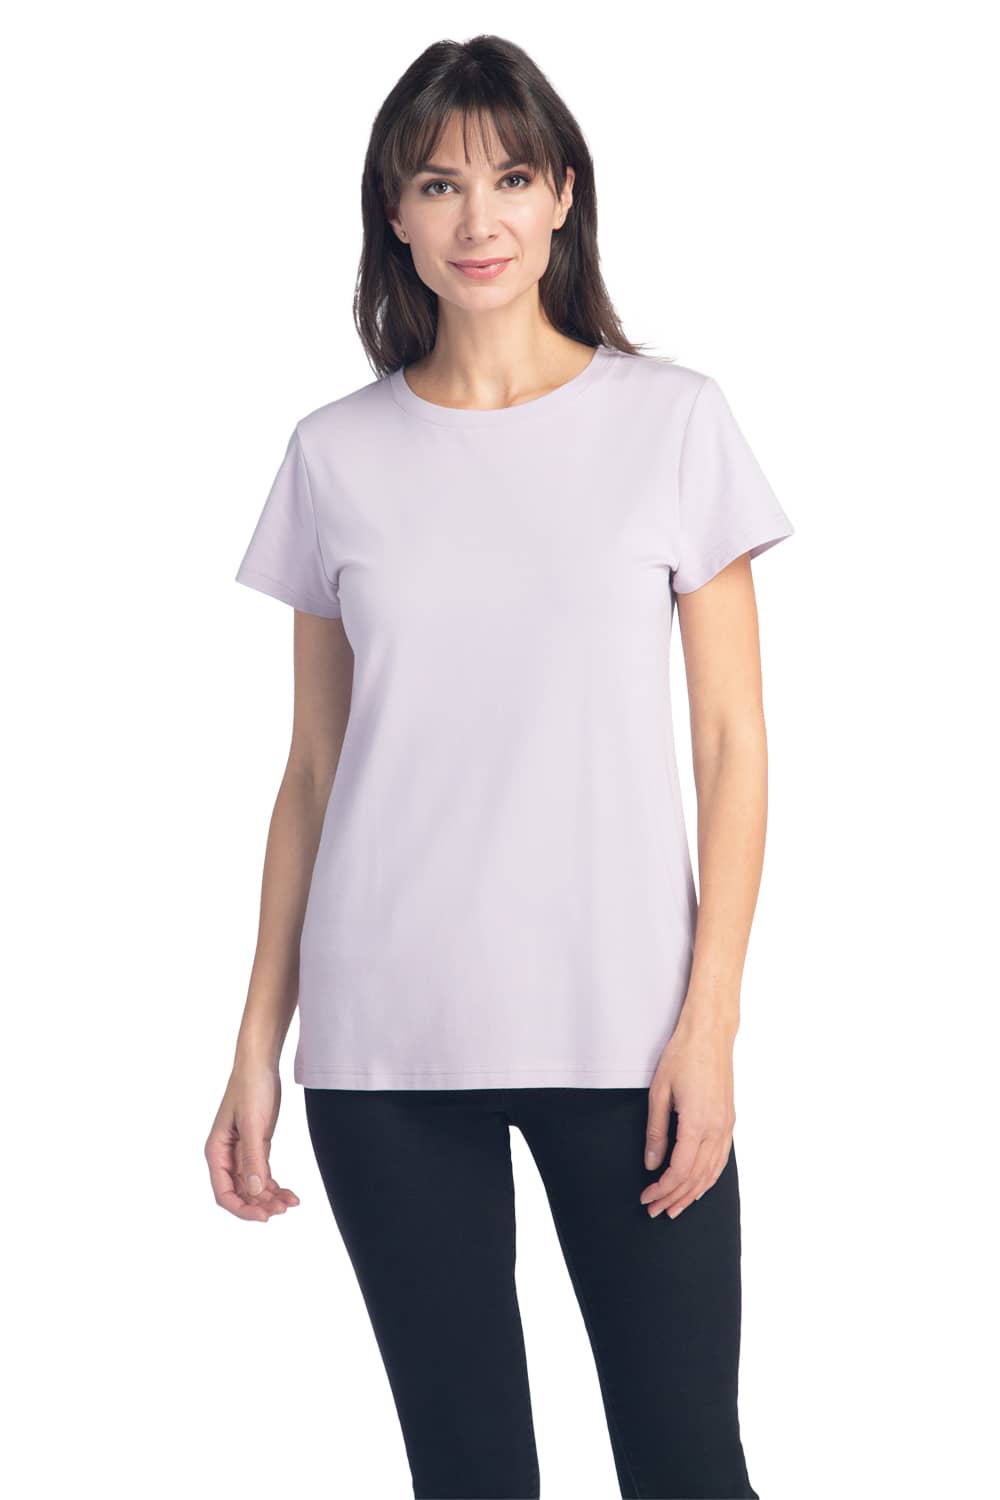 Women's Classic Fit EcoFabric™ Crew Neck Tee Womens>Casual>Top Fishers Finery Lavender Fog X-Small 